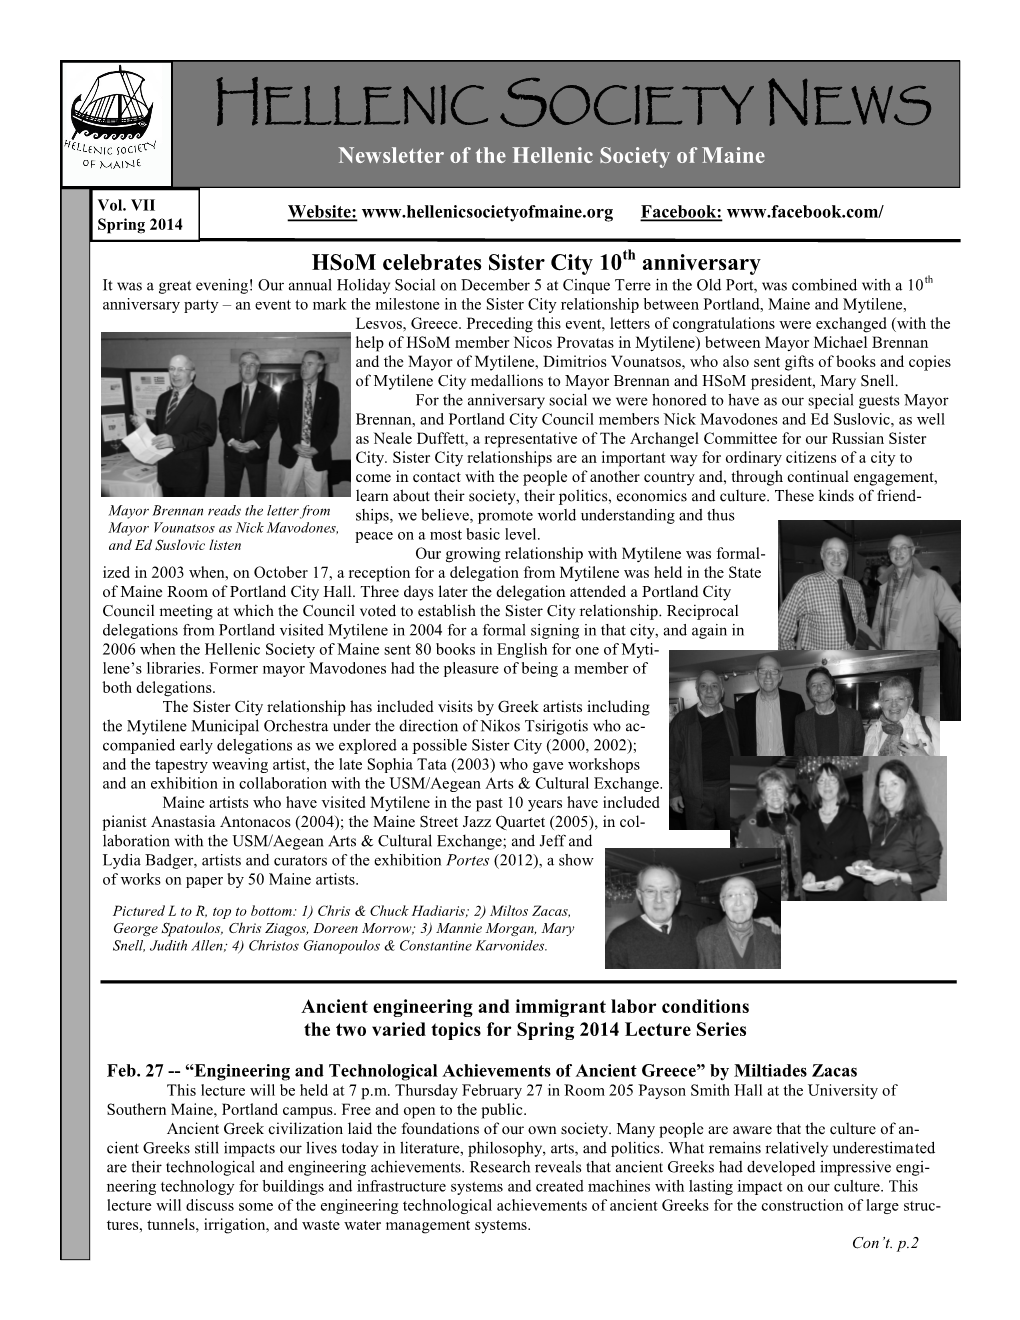 HELLENIC SOCIETY NEWS Newsletter of the Hellenic Society of Maine